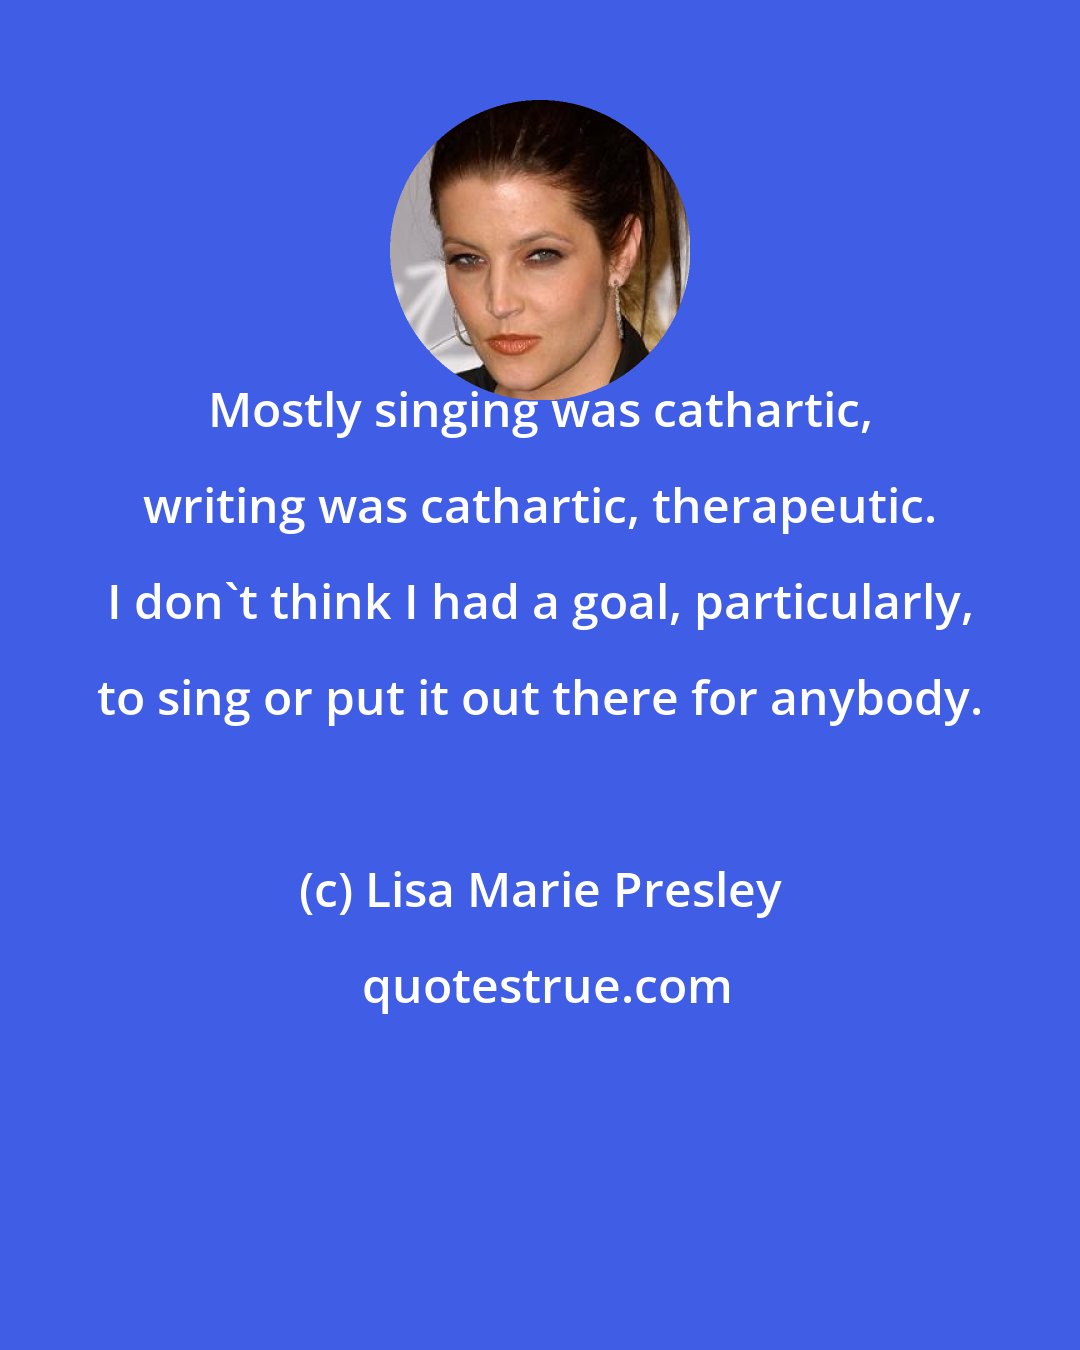 Lisa Marie Presley: Mostly singing was cathartic, writing was cathartic, therapeutic. I don't think I had a goal, particularly, to sing or put it out there for anybody.